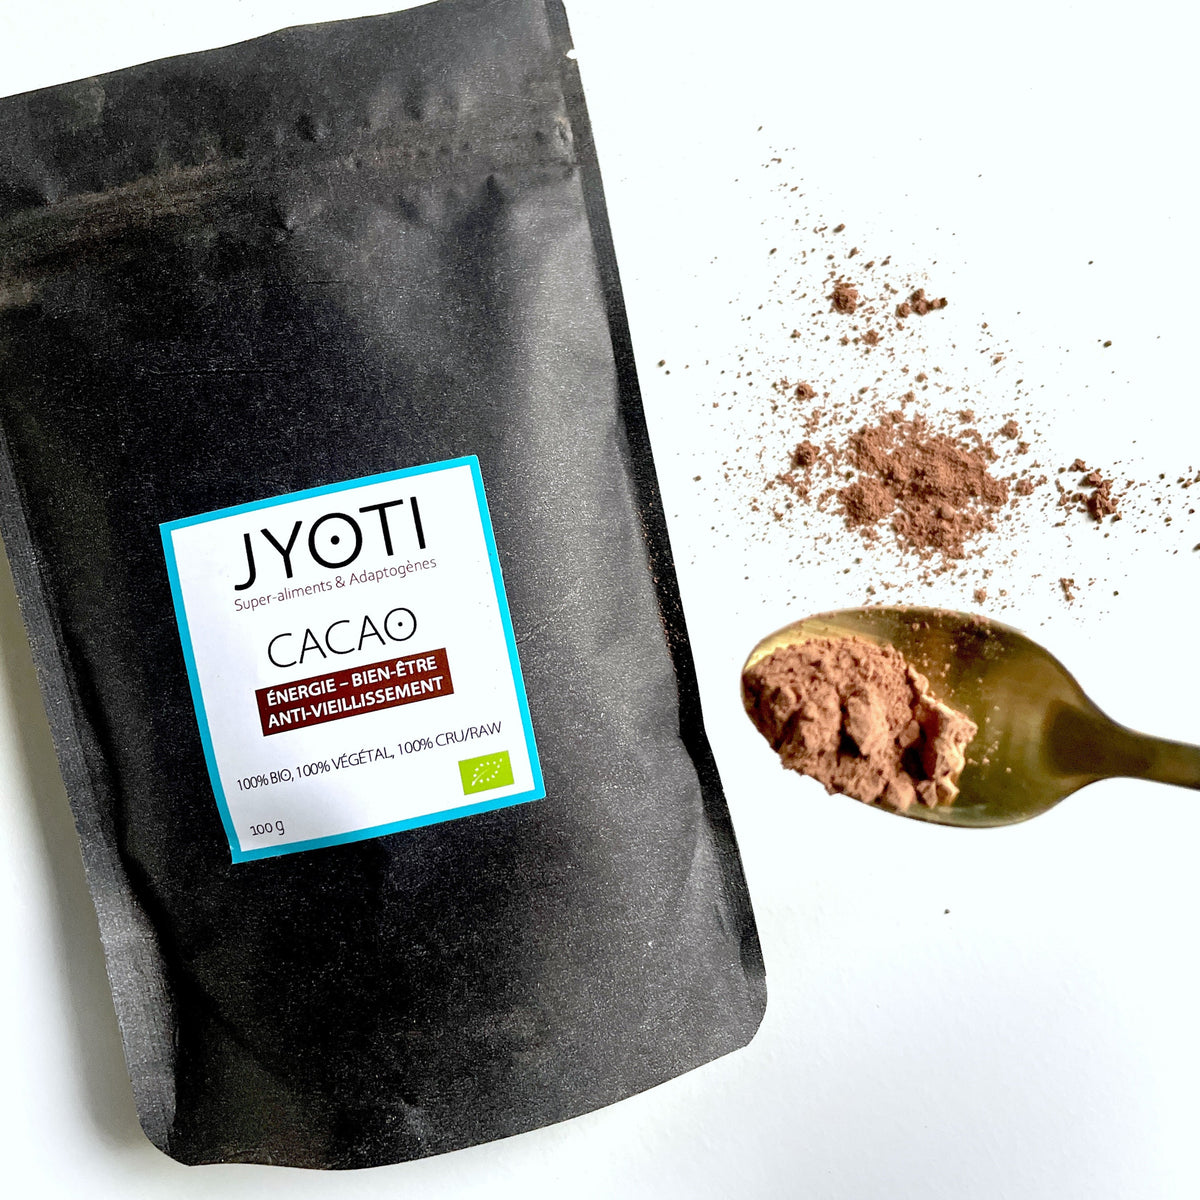 JYOTI Superaliment CACAO